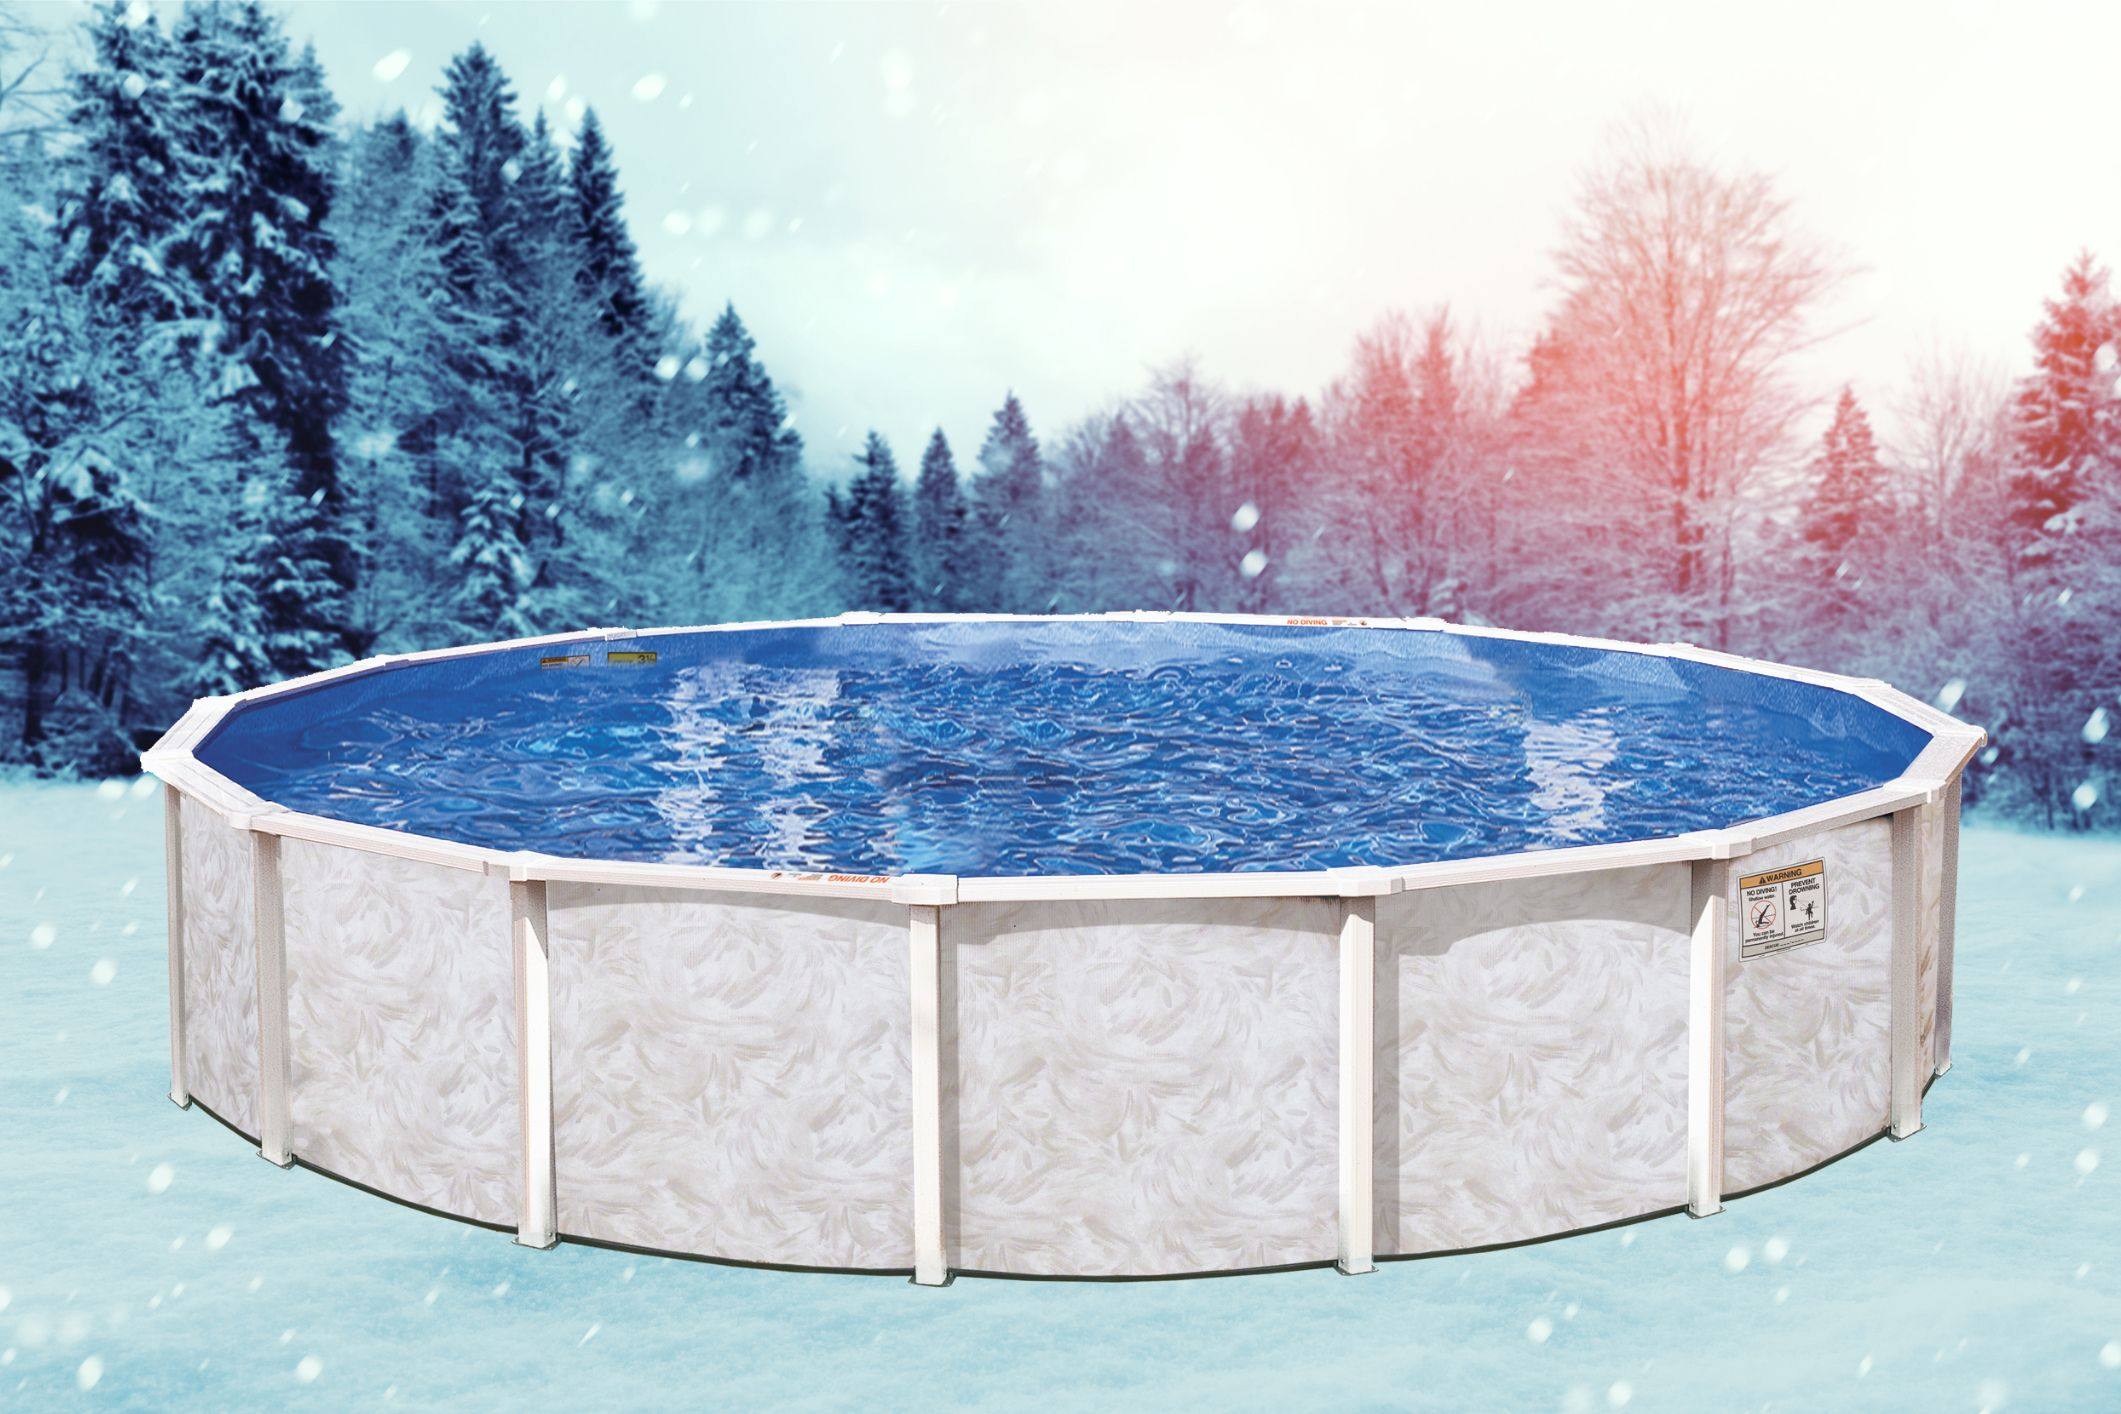 Doughboy pool. An above ground pool with a snowy background.